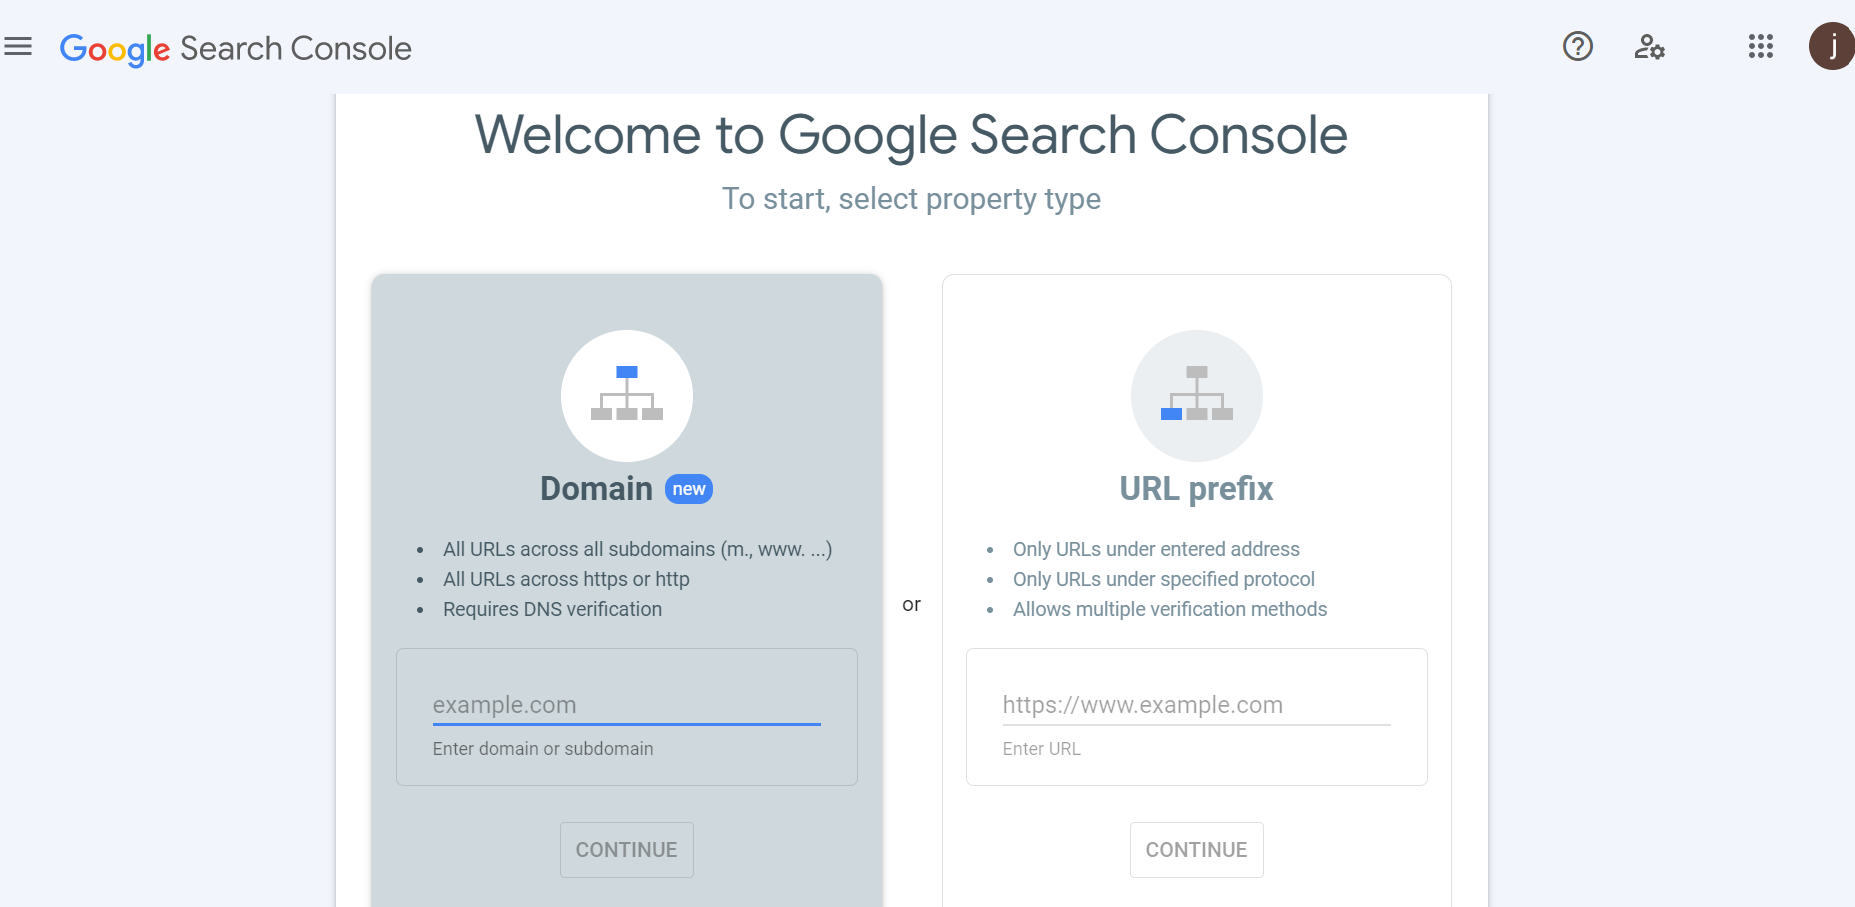 How to set up Google Search Console